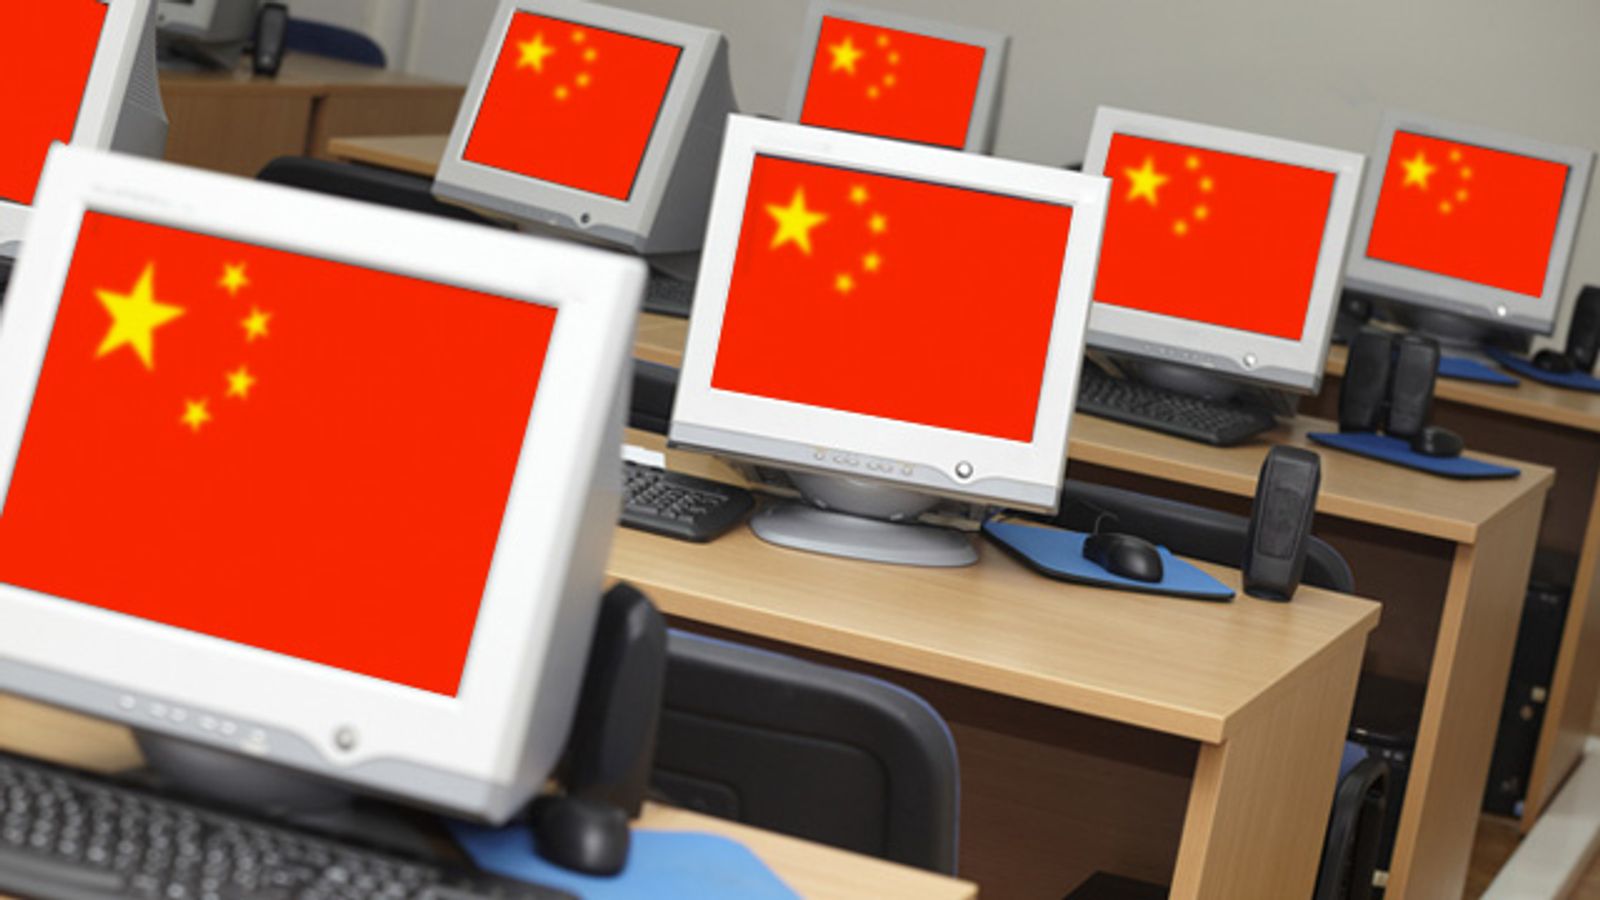 Want to Start a Website in China? Pony Up Your Firstborn